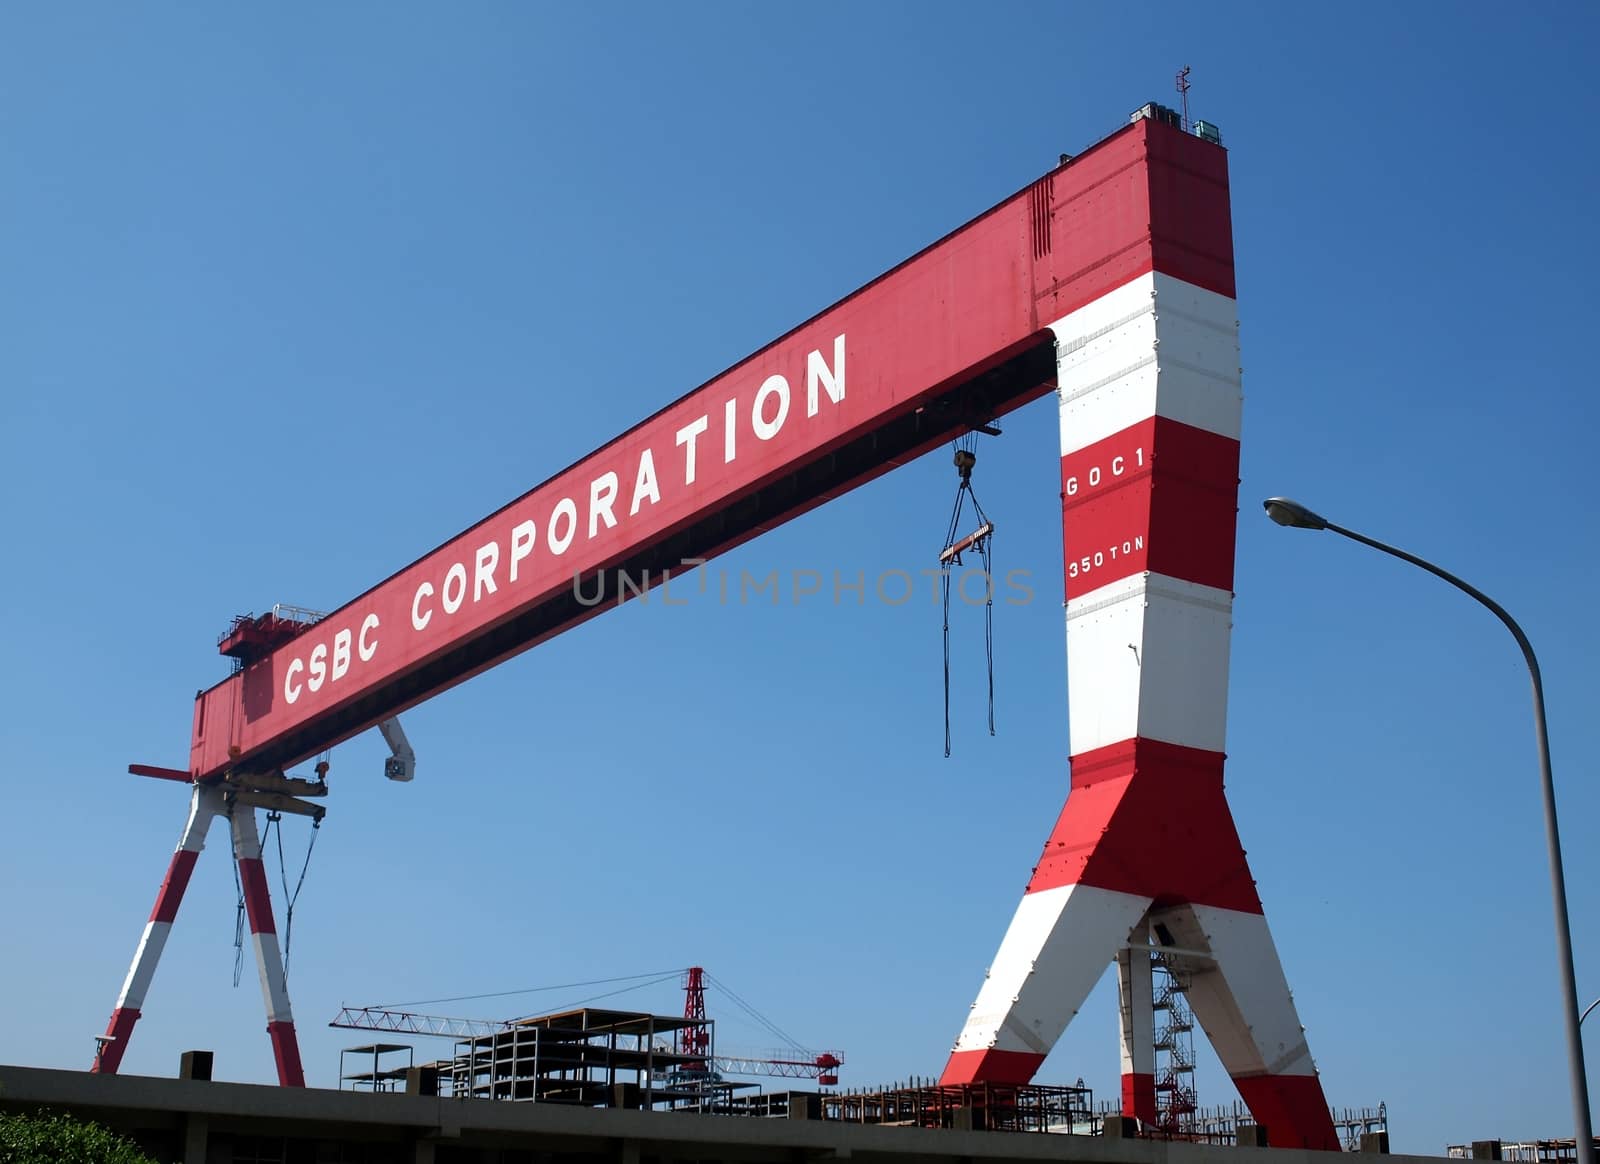 KAOHSIUNG, TAIWAN, JUNE 4: CSBC Corporation in Taiwan increased its sales in May by 41.19%, reports Bloomberg Financial Services on June 4, 2012 in Kaohsiung . Pictured here is one of the CSBC shipbuilding facilities.